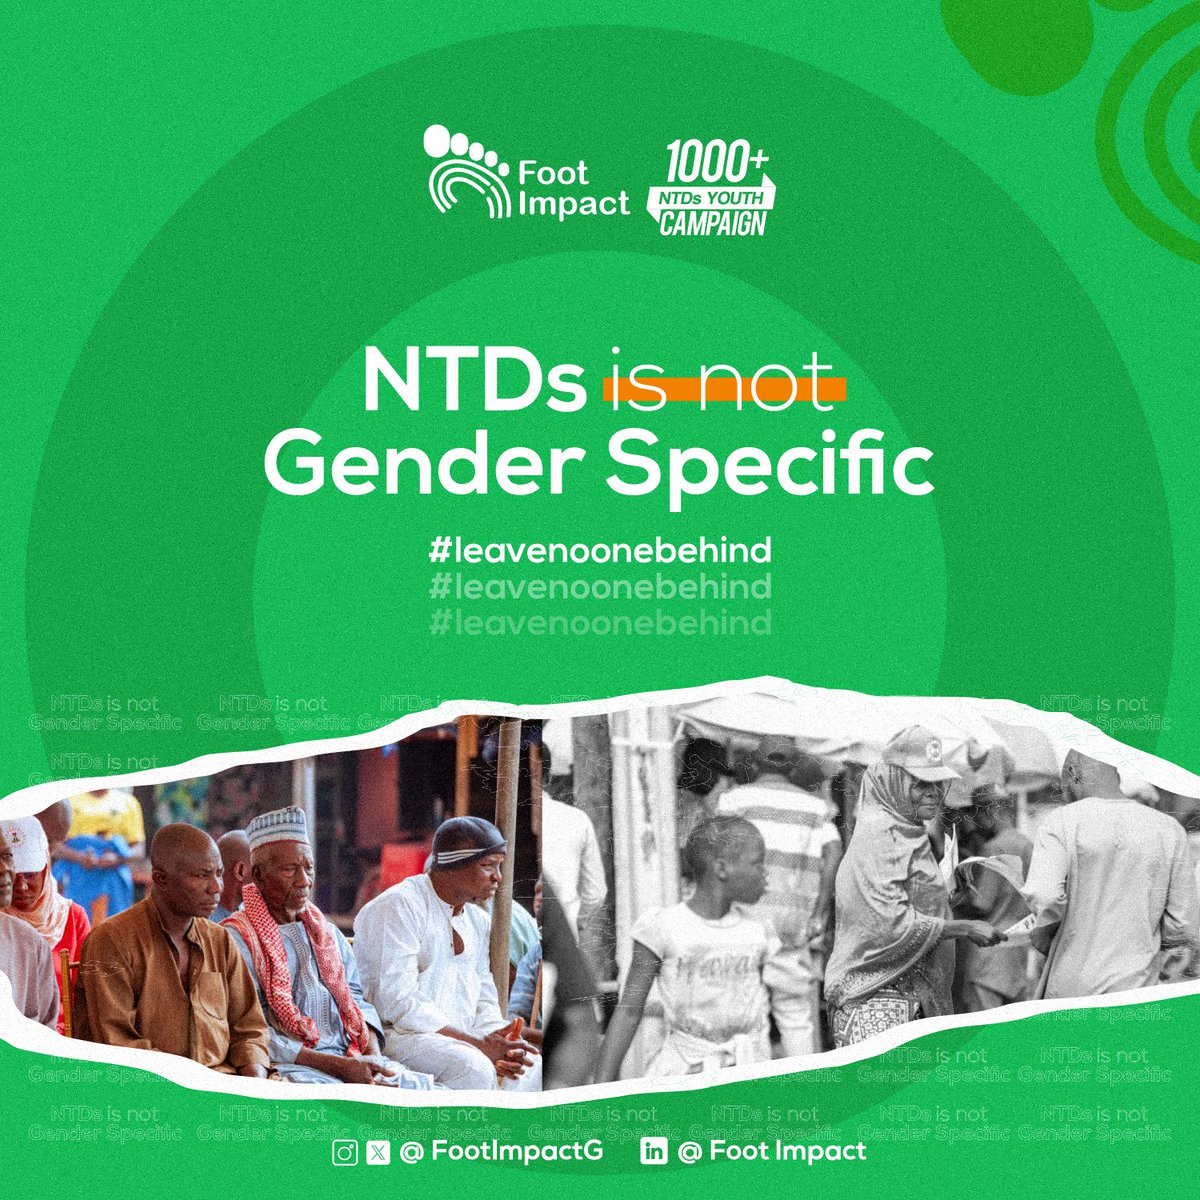 #NTDs are not gender specific. It is important to emphasize that NTDs affect both men and women. Anyone can become infected with ... linkedin.com/posts/footimpa… #leavenoonebehind #EndNTDs #BeatNTDsNaija #BeatNTDs #100percentcommitted #YouthcombatingNTDs #1000plusNTDYouthcampaign